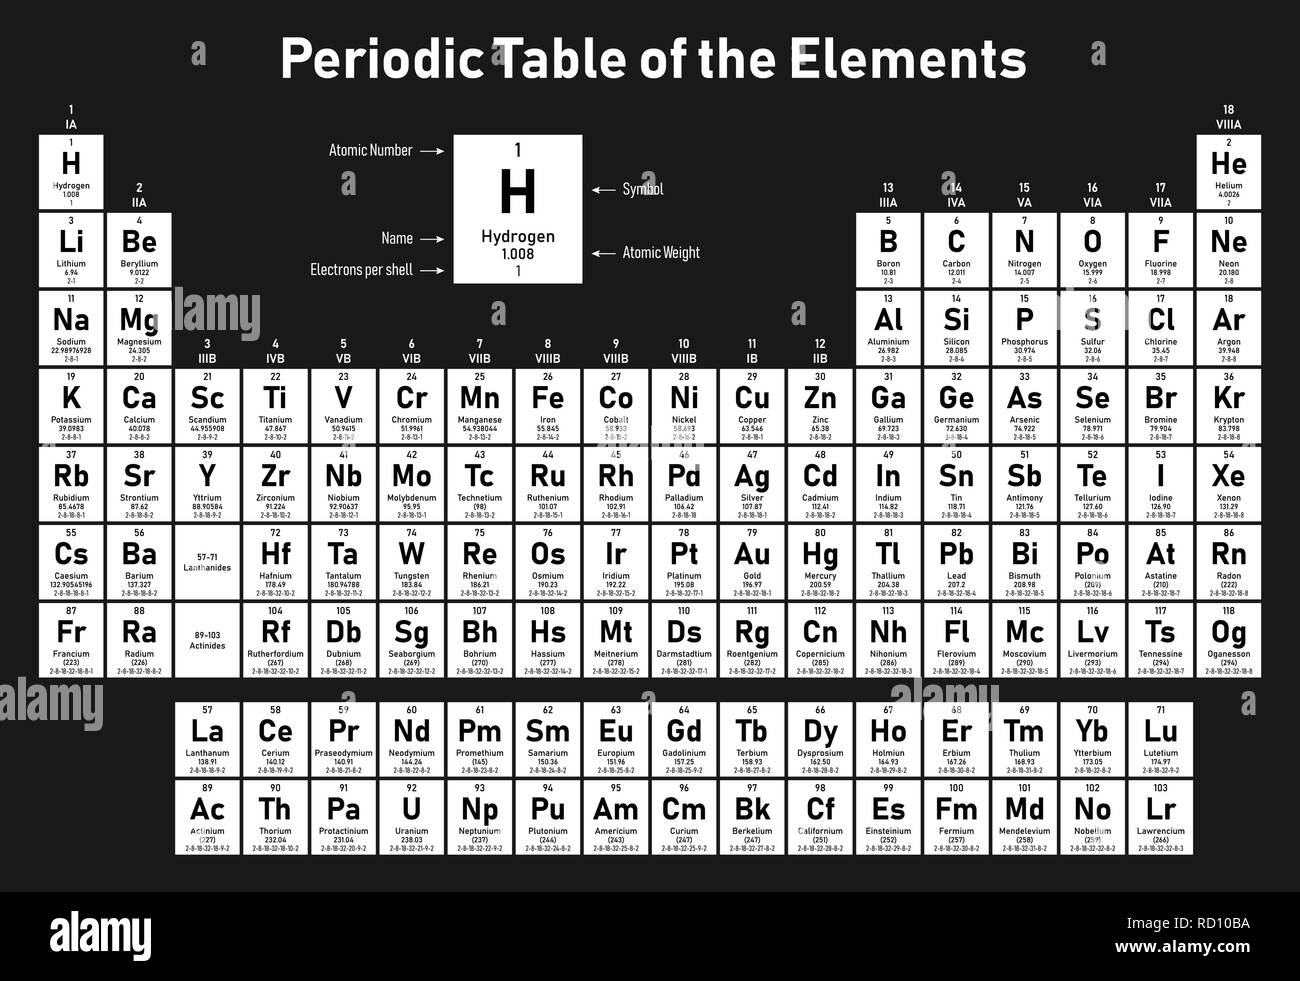 Periodic Table Of Elements With Full Names And Symbols And Atomic Mass ...